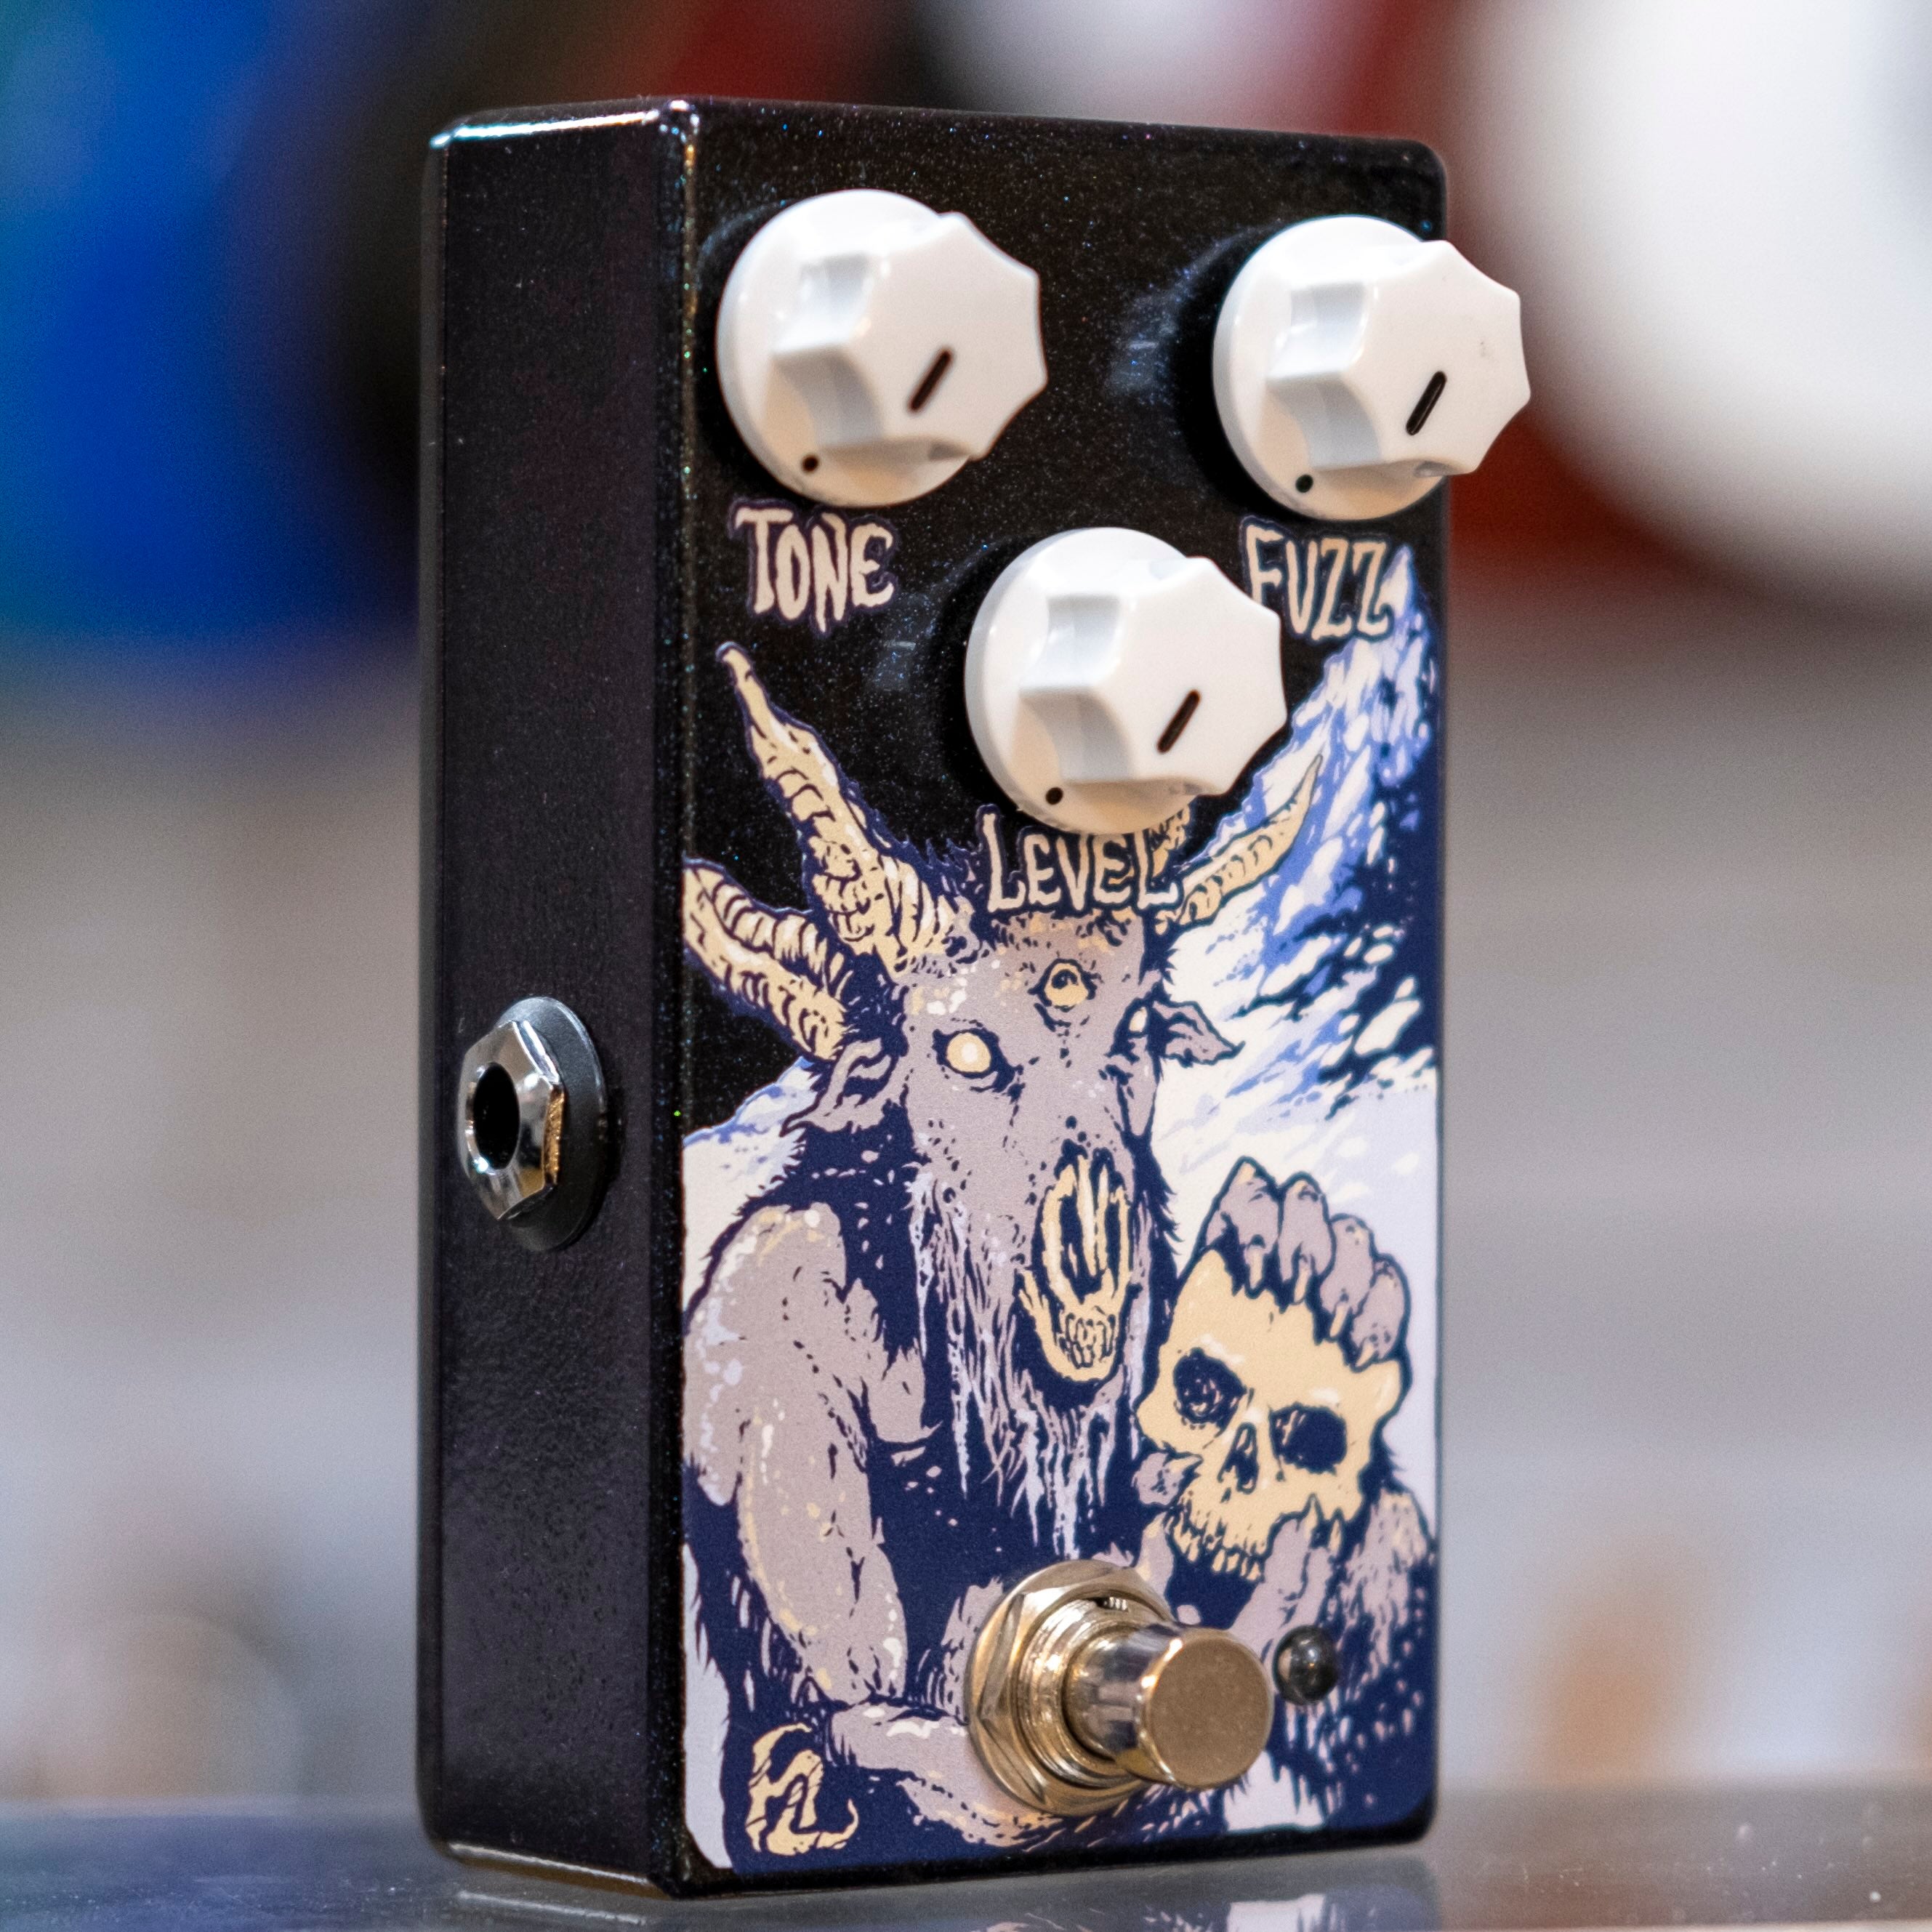 Haunted Labs Frost Bite Fuzz Pedal